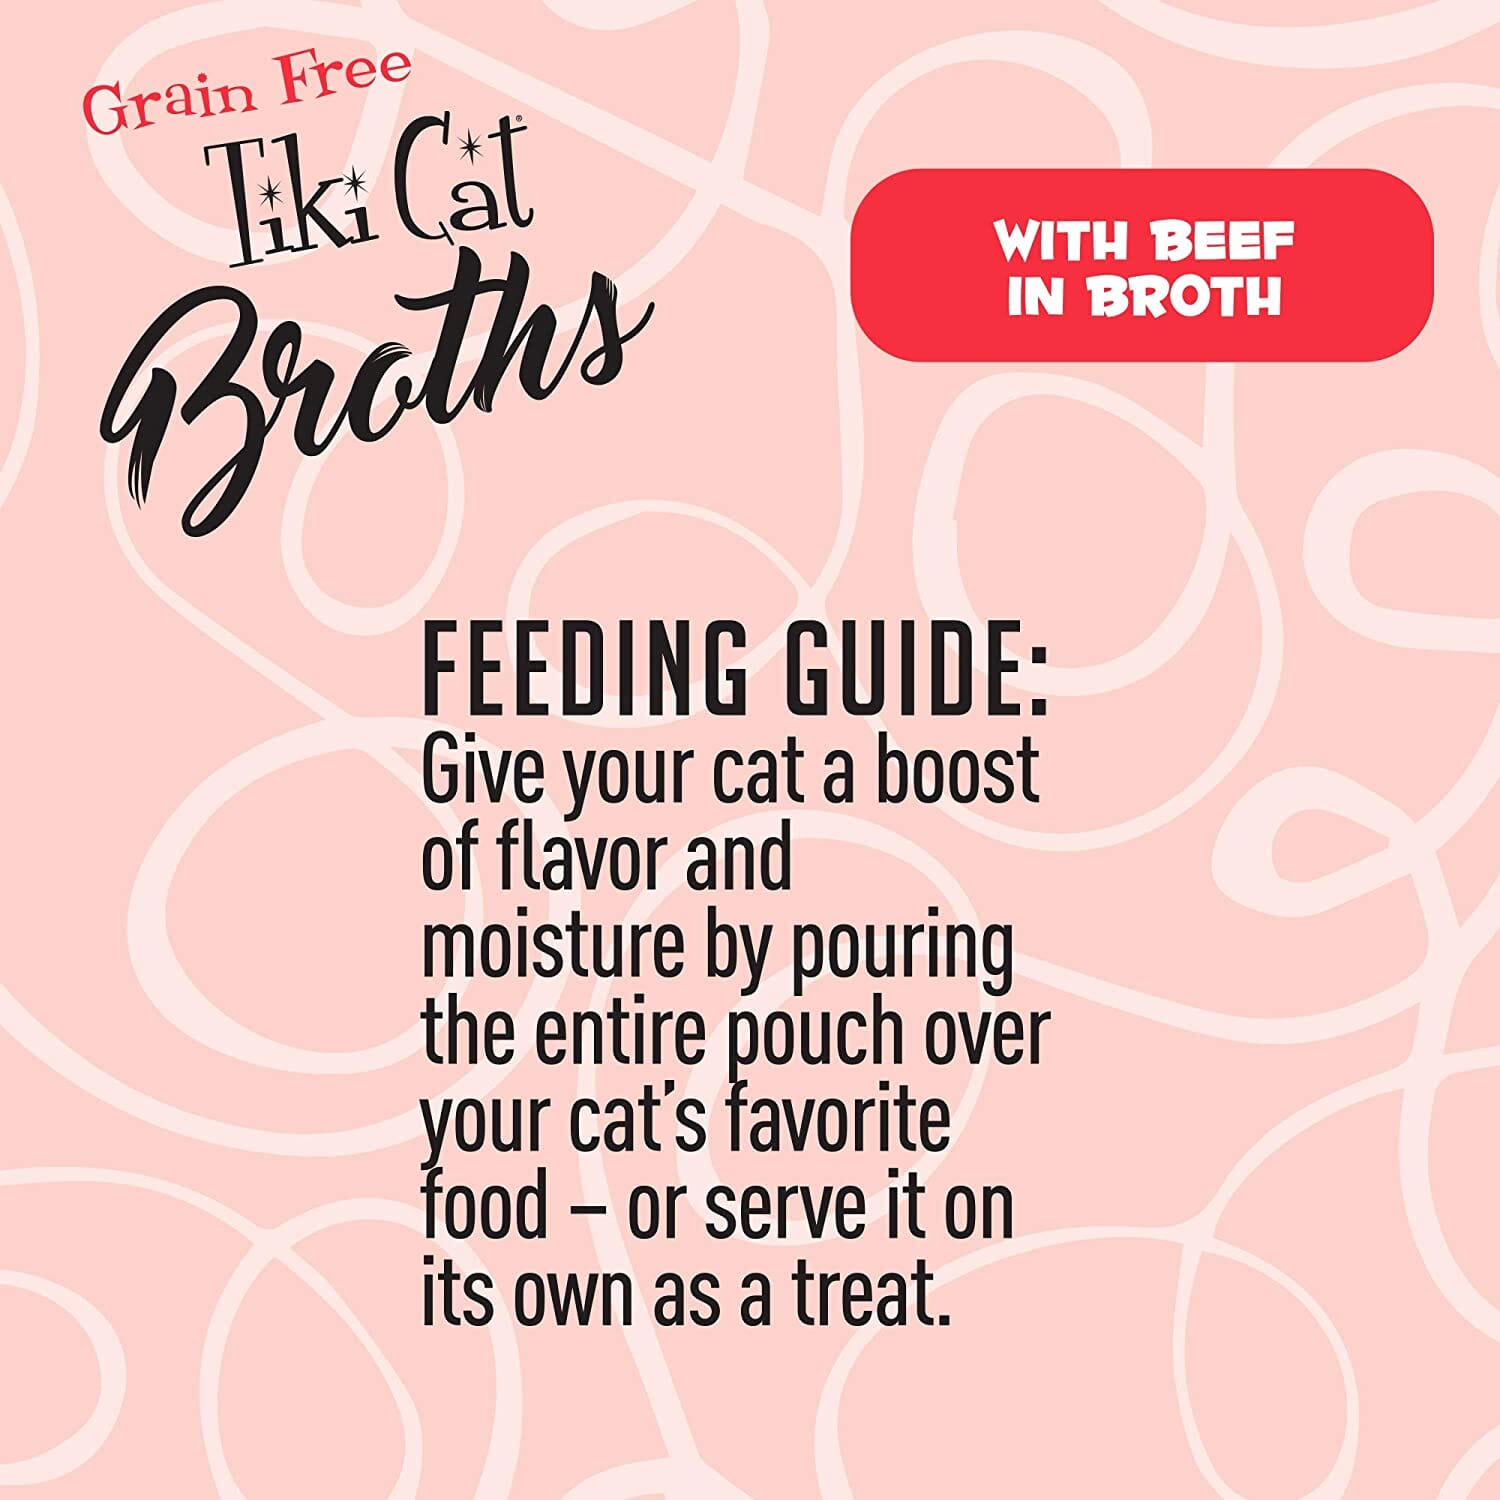 Tiki Cat Beef Broth Cat Food Toppers - 1.3 Oz Pouch - Pack of 12  